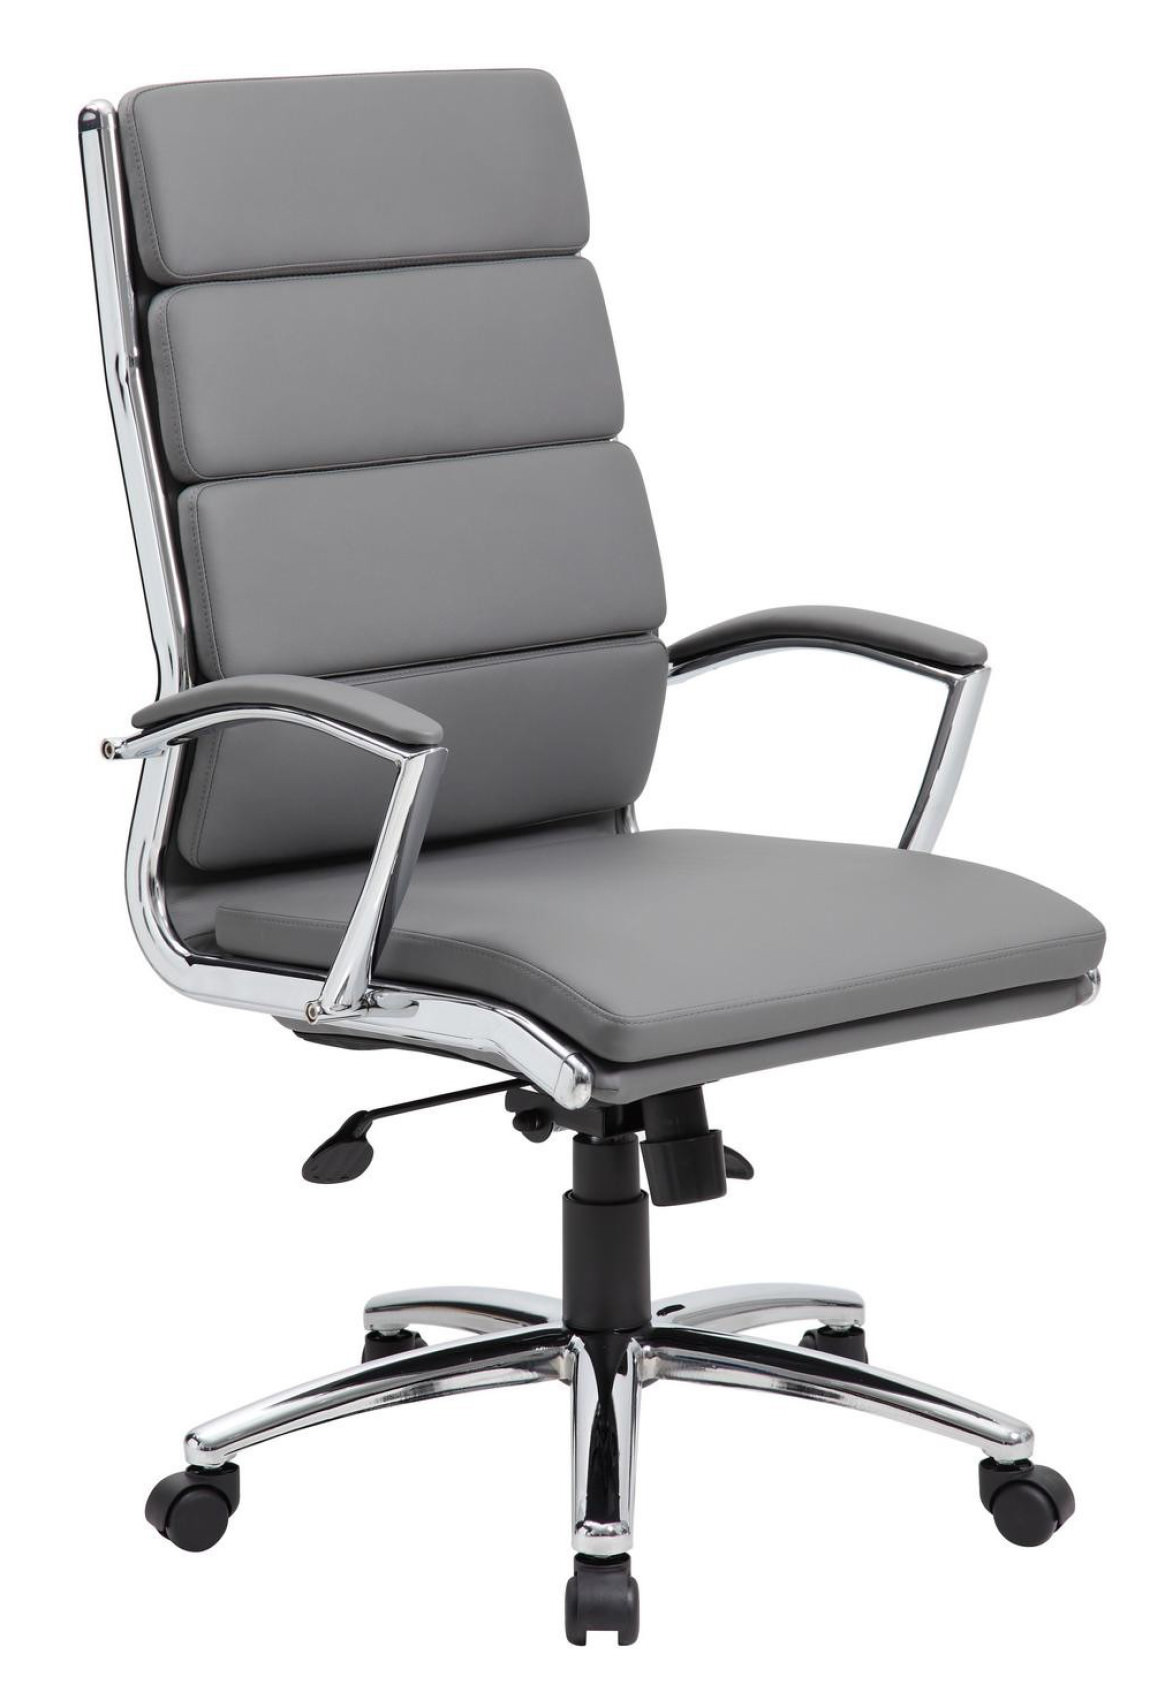 chair for conference room